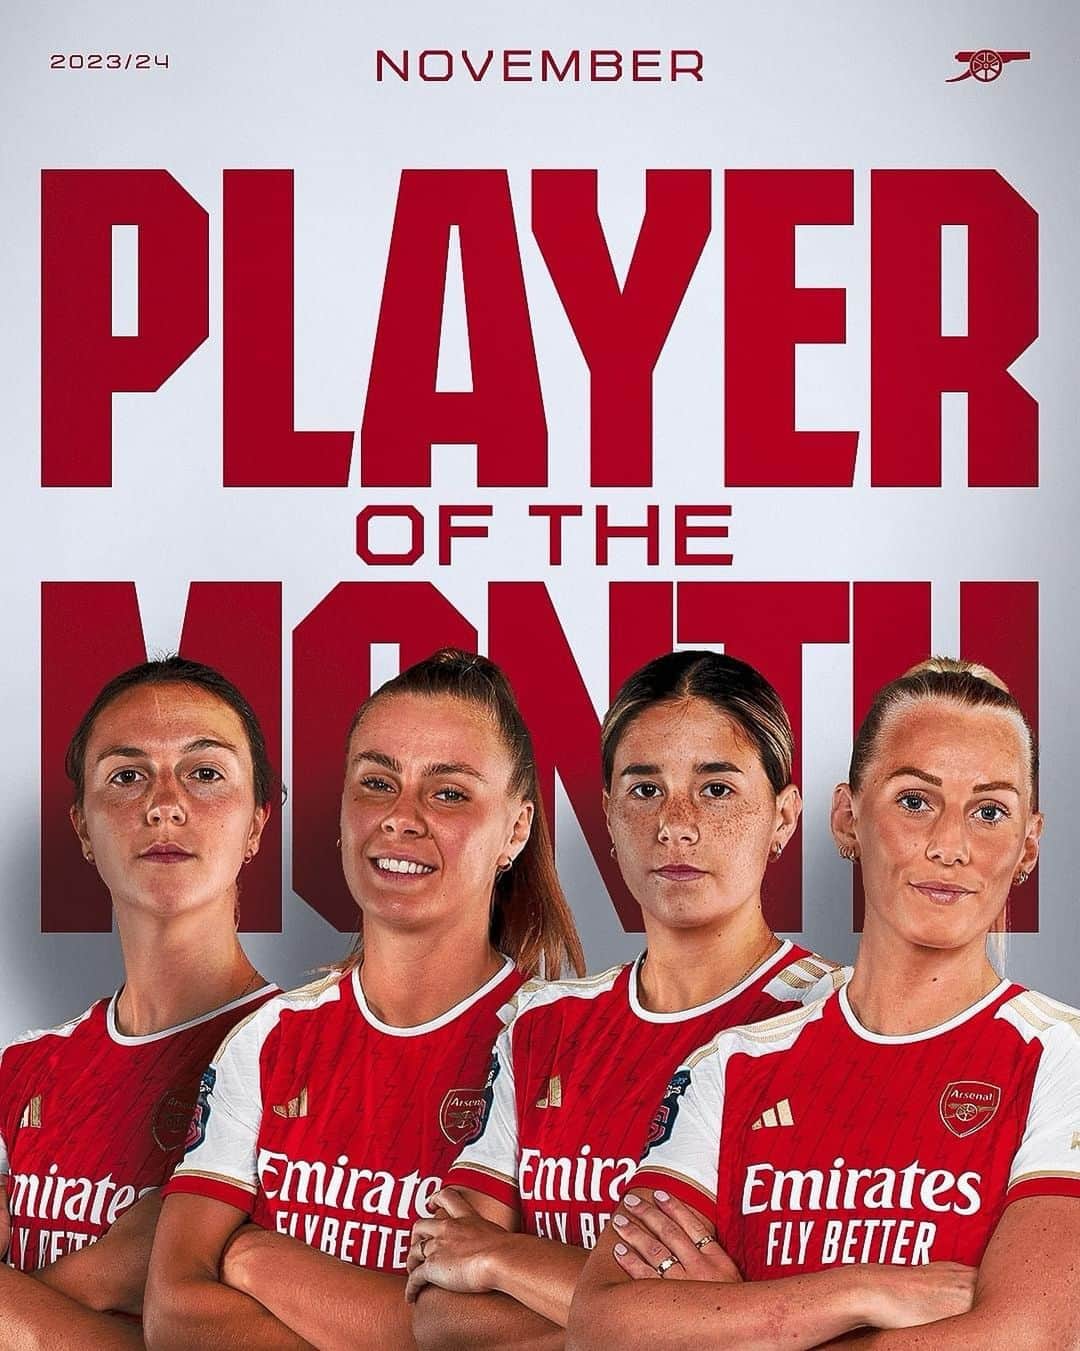 Arsenal Ladiesのインスタグラム：「After an unbeaten November, it’s time to pick our Player of the Month 🗳️  🏴󠁧󠁢󠁥󠁮󠁧󠁿 Lotte Wubben-Moy 🇳🇱 Victoria Pelova 🇦🇺 Kyra Cooney-Cross 🇸🇪 Stina Blackstenius  Get voting via our stories, Gooners!」